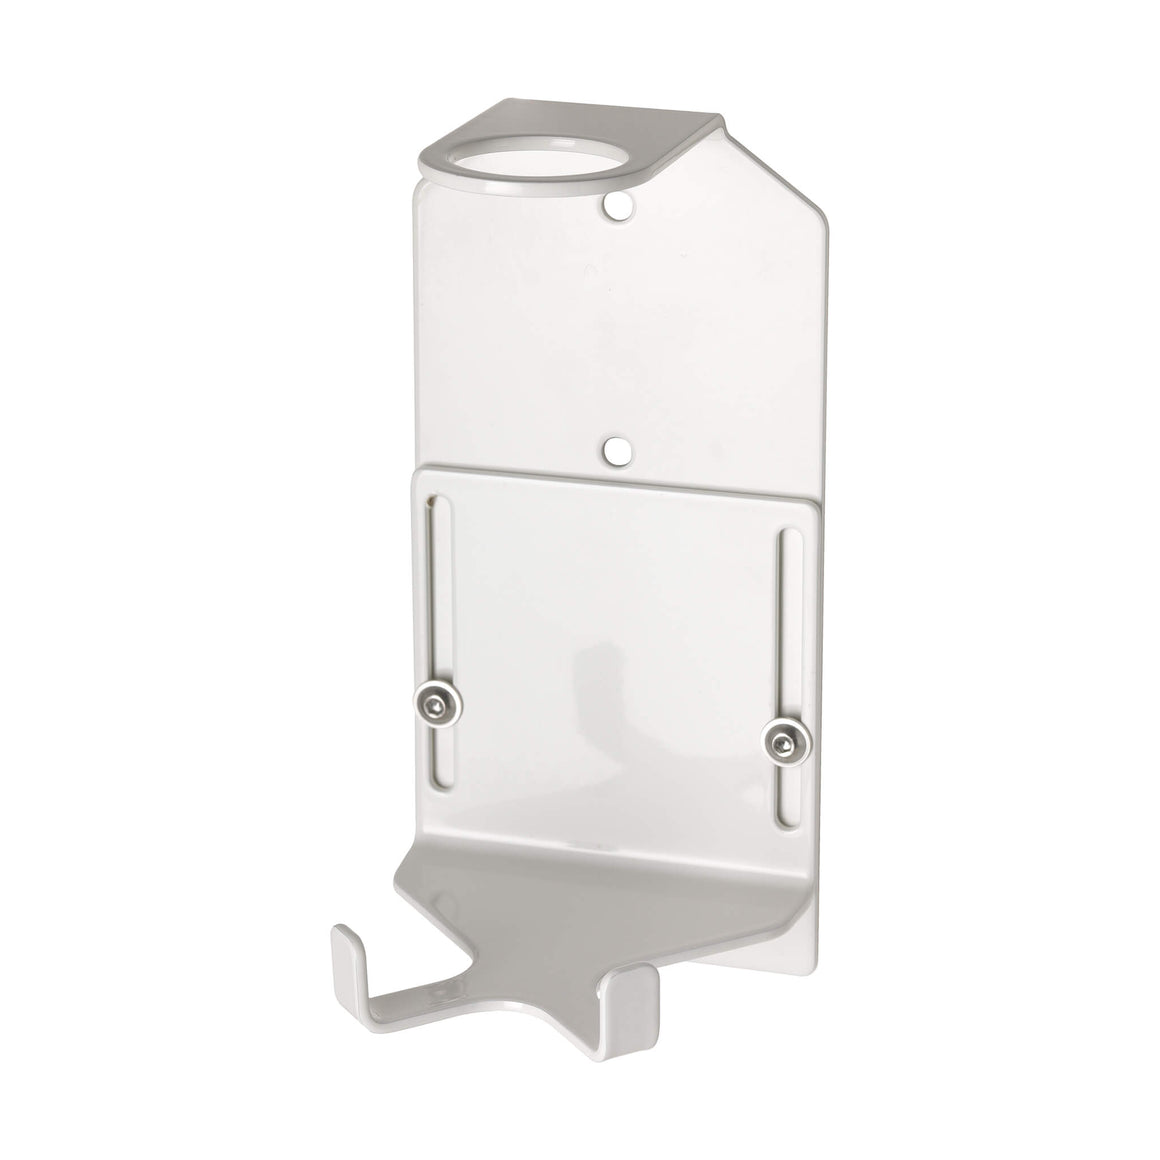 Single 300ml Security Wall-Mounted Holder - Satin White